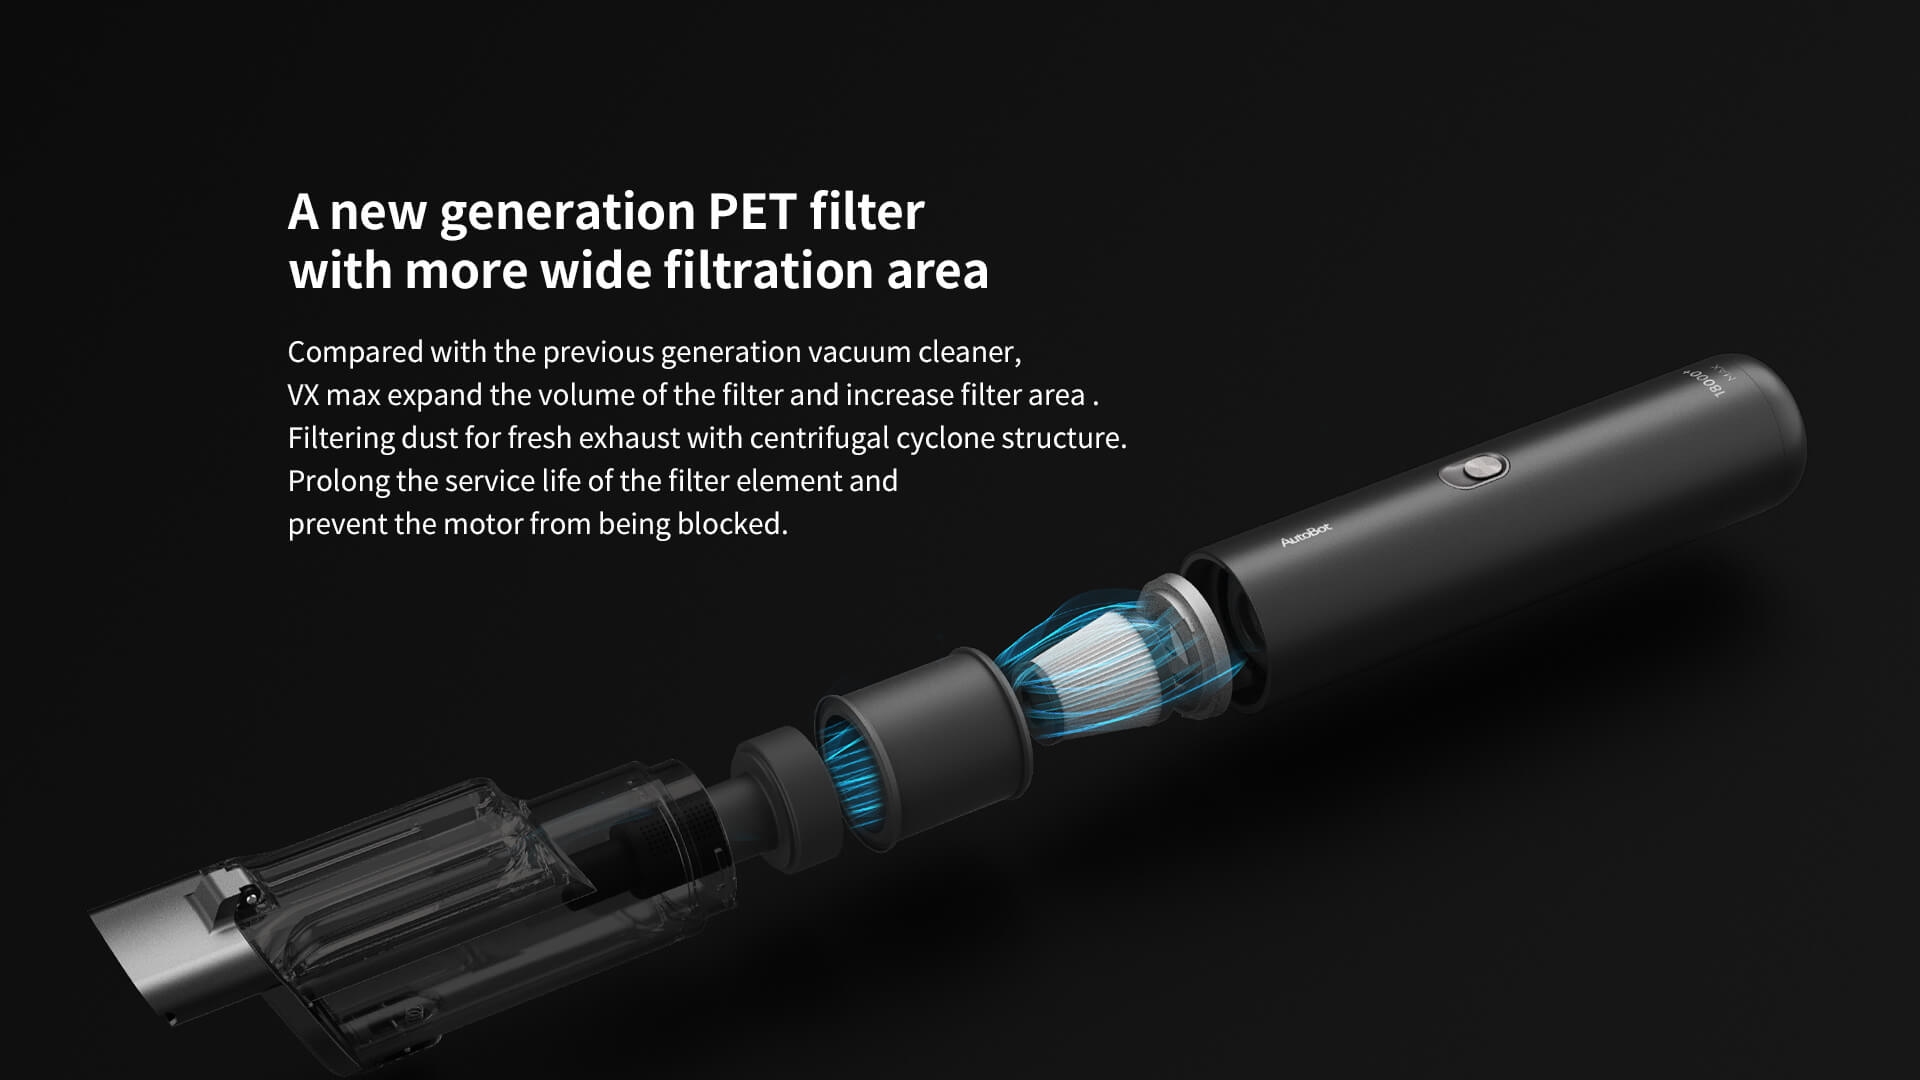 A new generation PET filter with more wide filtration areaCompared with the previous generation vacuum cleaner, VX max expand the volume of the filter and increase filter area.Filtering dust for fresh exhaust with centrifugal cyclone structure.Prolong the service life of the filter element and prevent the motor from being blocked